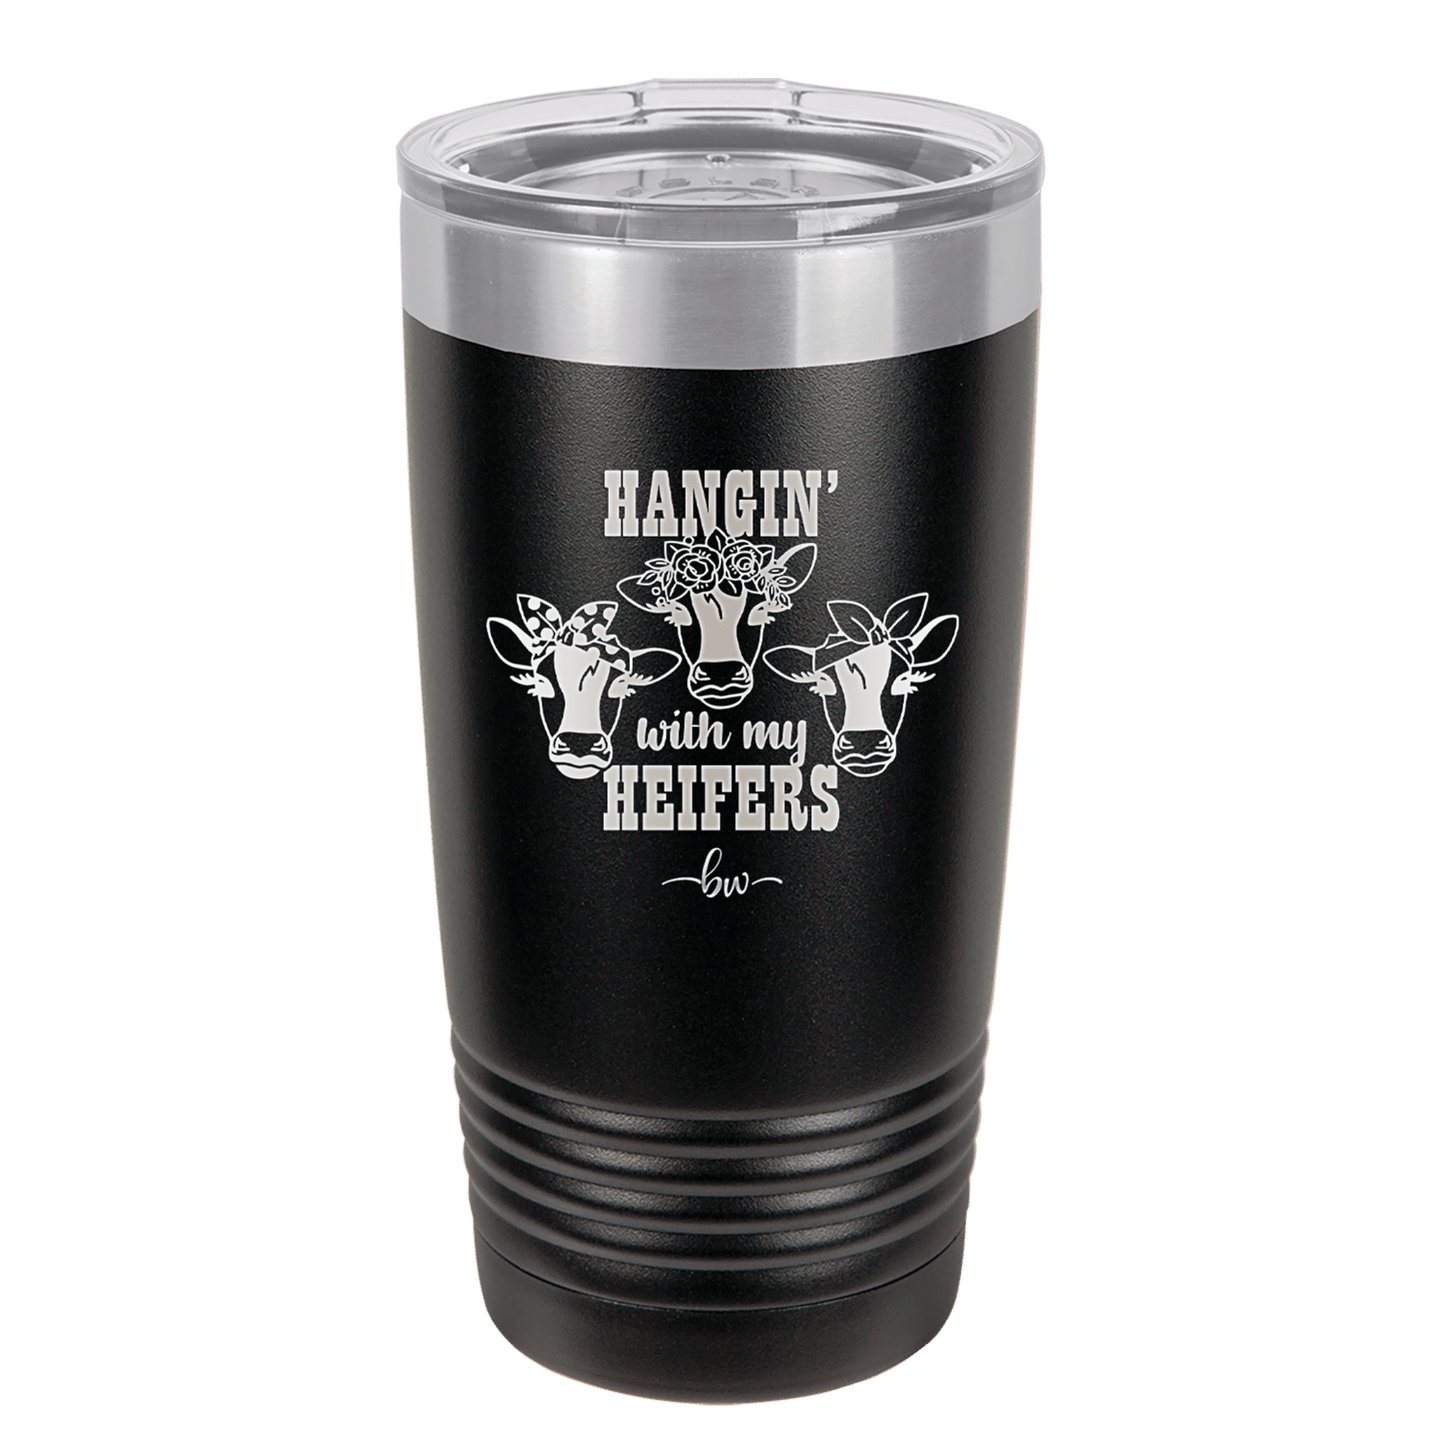 Hangin' with My Heifers 2 - Laser Engraved Stainless Steel Drinkware - 1492 -